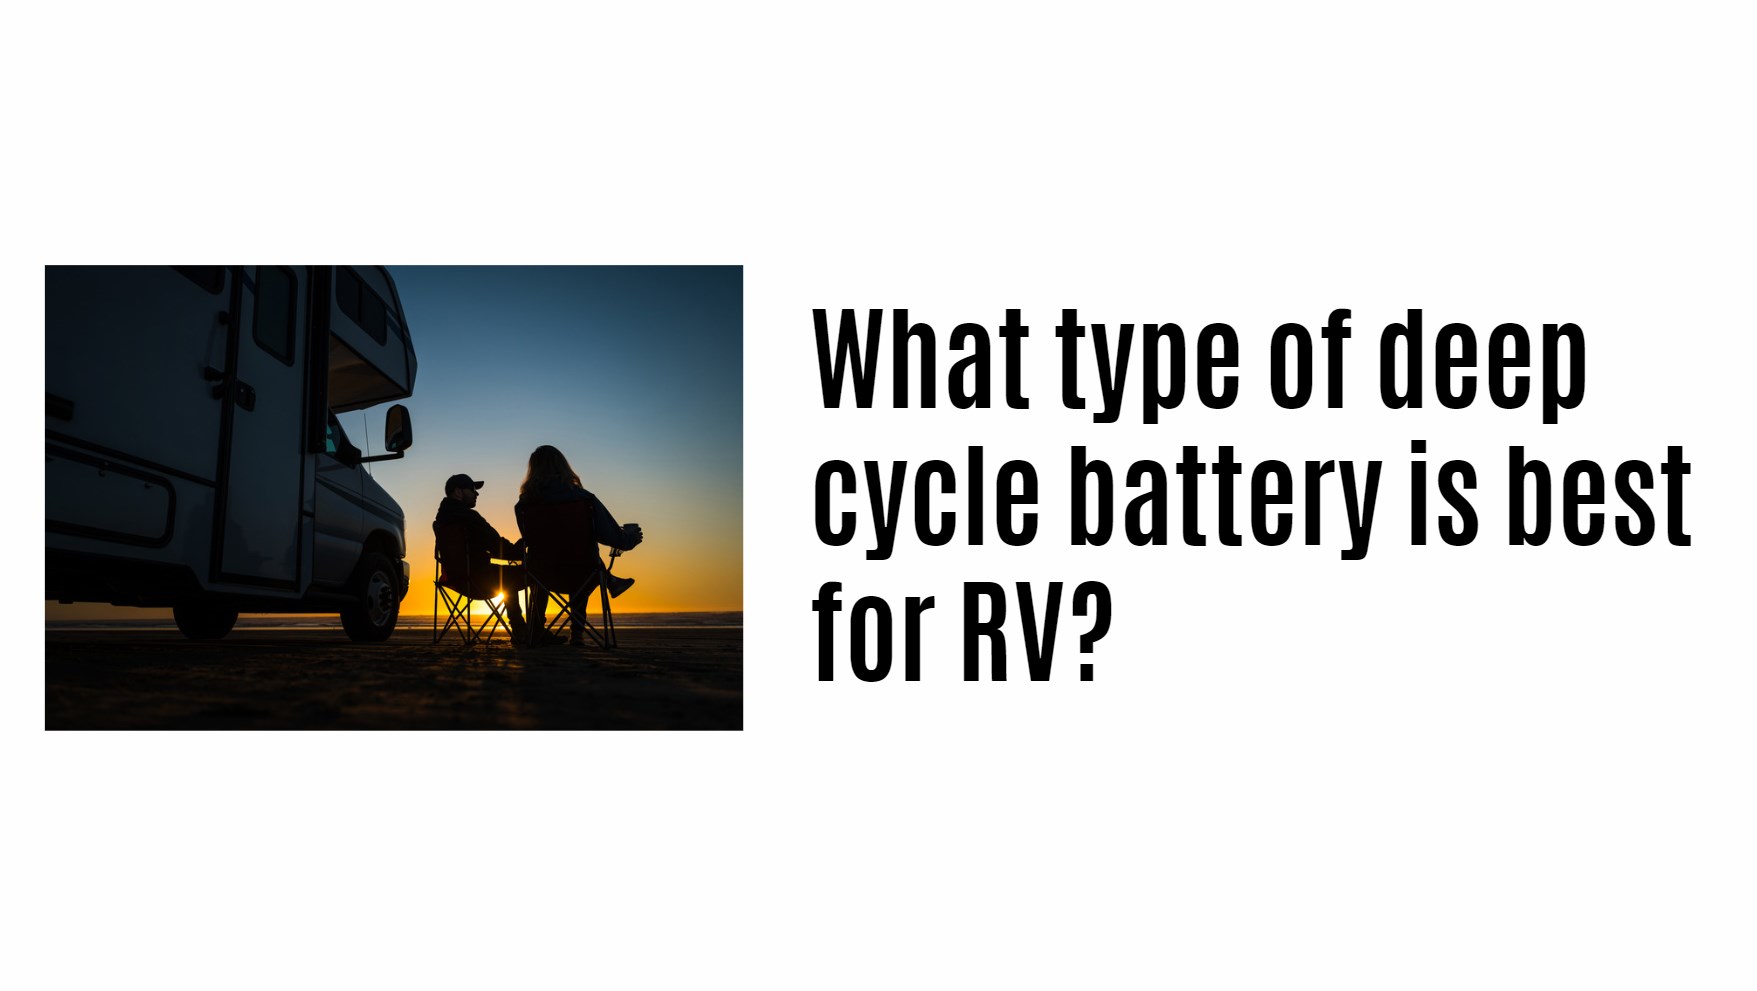 What type of deep cycle battery is best for RV?